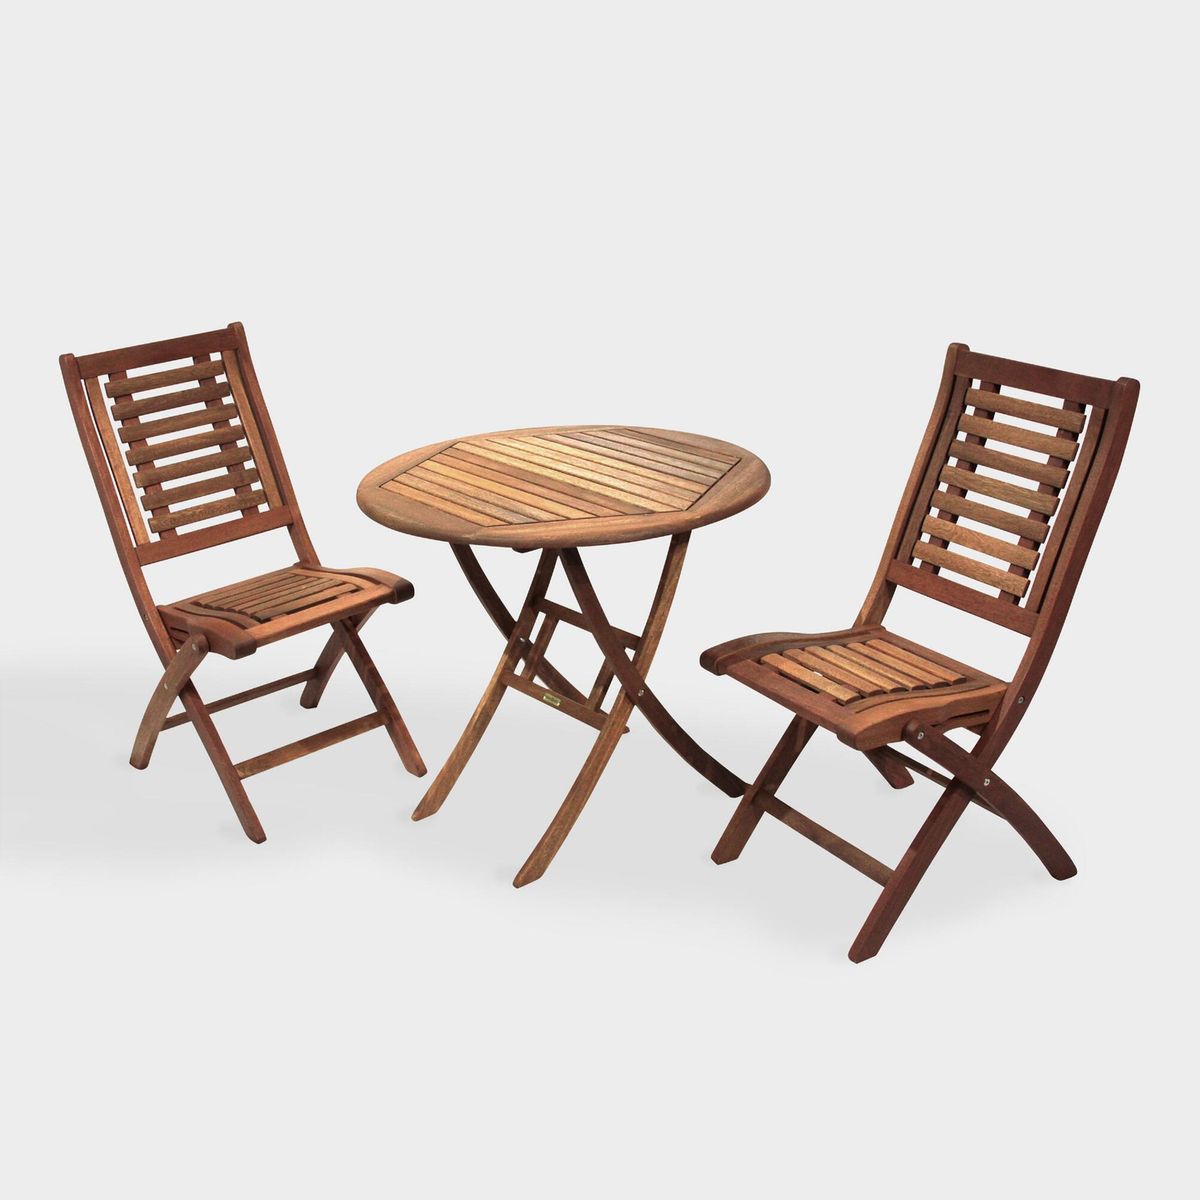 The Best Outdoor Patio Dining Sets 2020, Small Wooden Folding Garden Table And Chairs